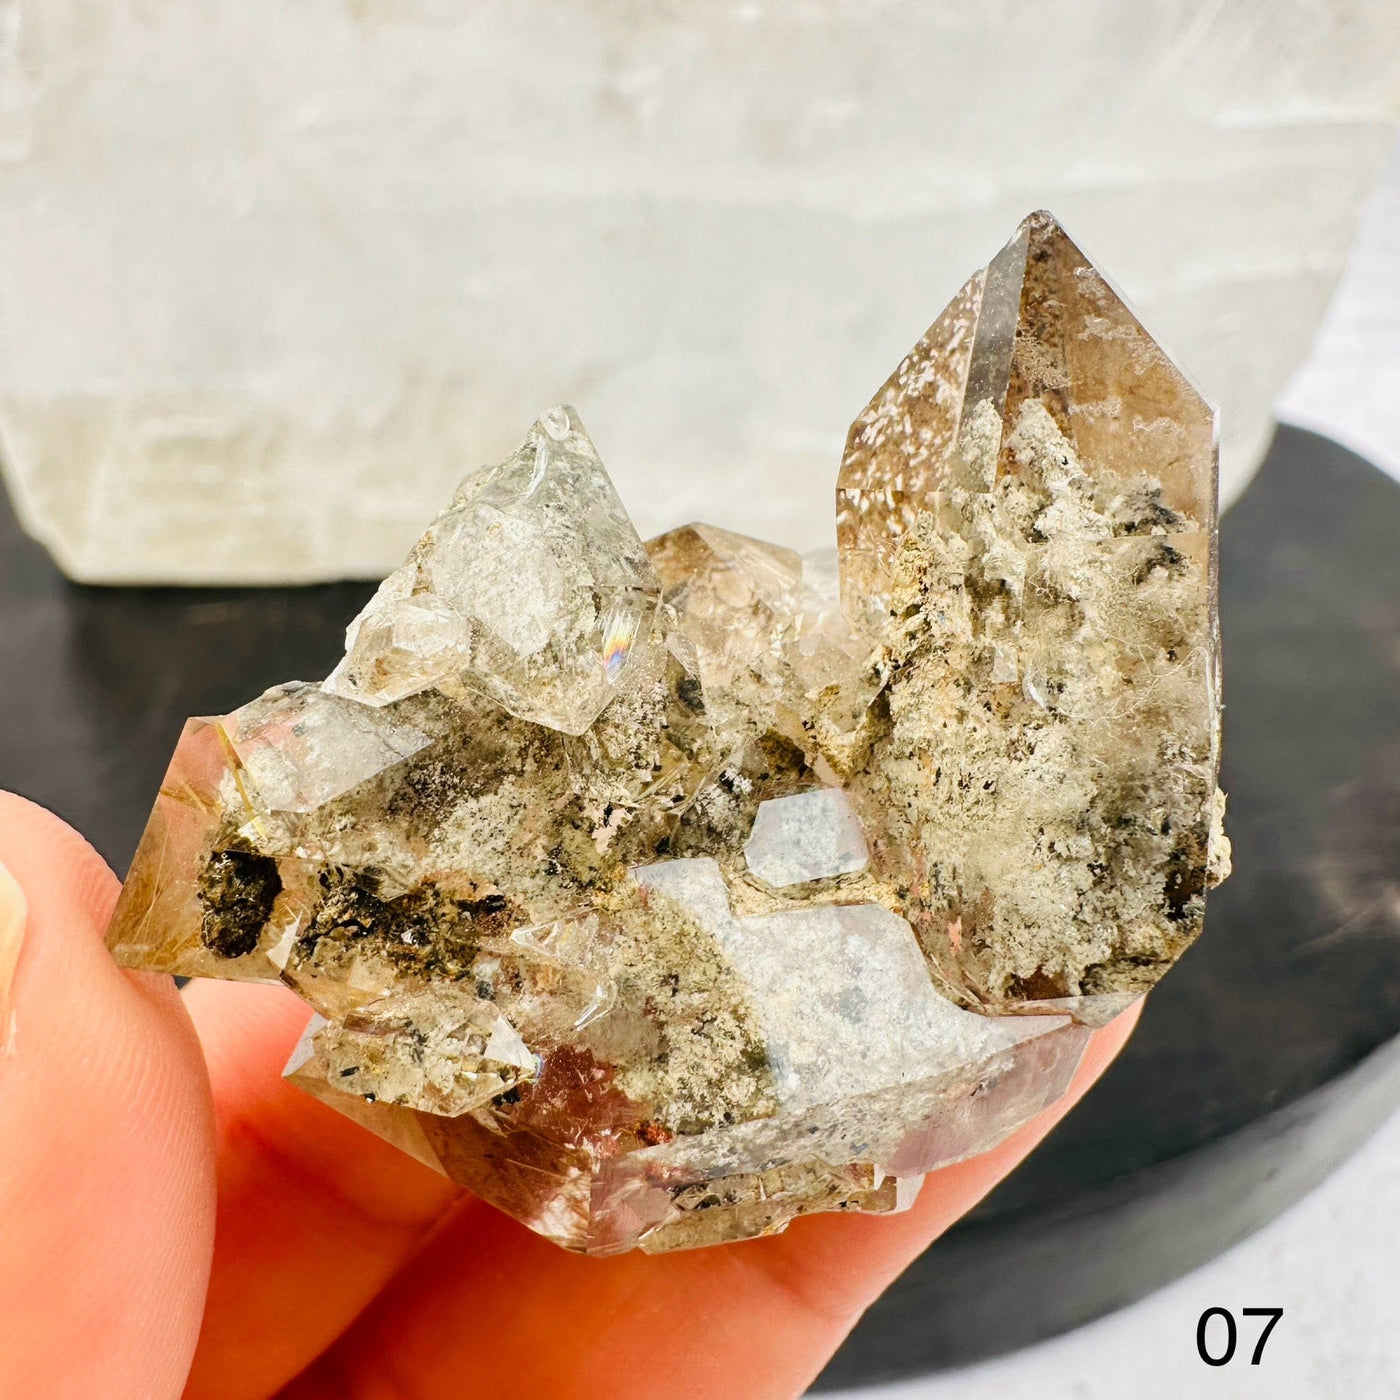 Natural Smoky Quartz Cluster with Rutilated inclusions. Option 07 in hand for size reference